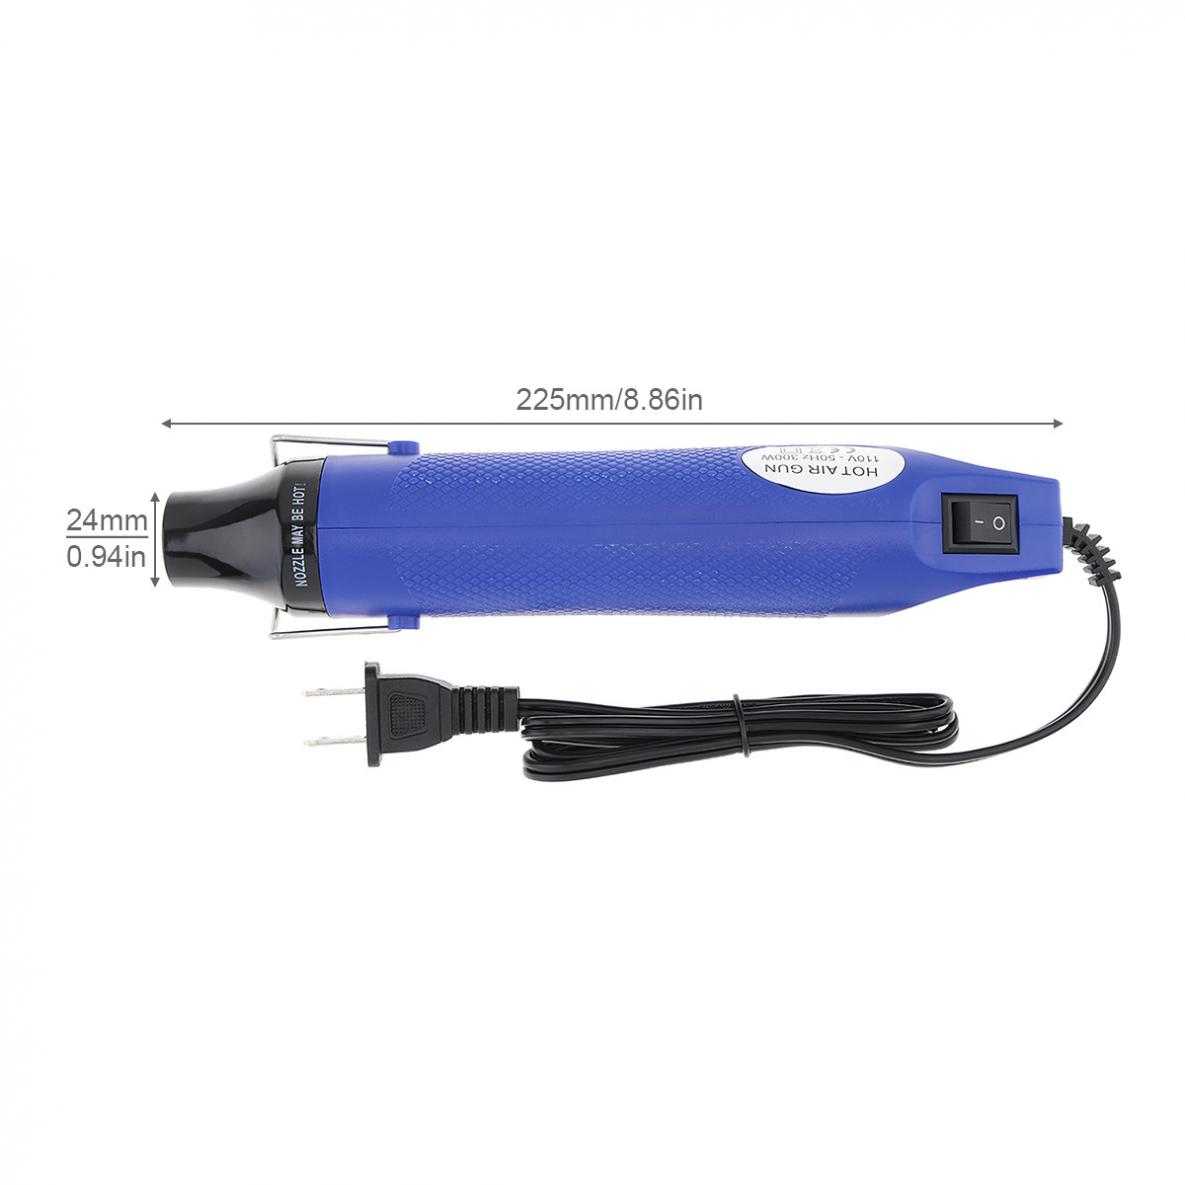 110V / 220V 300W Heat Gun Electric Blower Handmade with Shrink Plastic Surface and EU / US Plug for Heating DIY Accessories